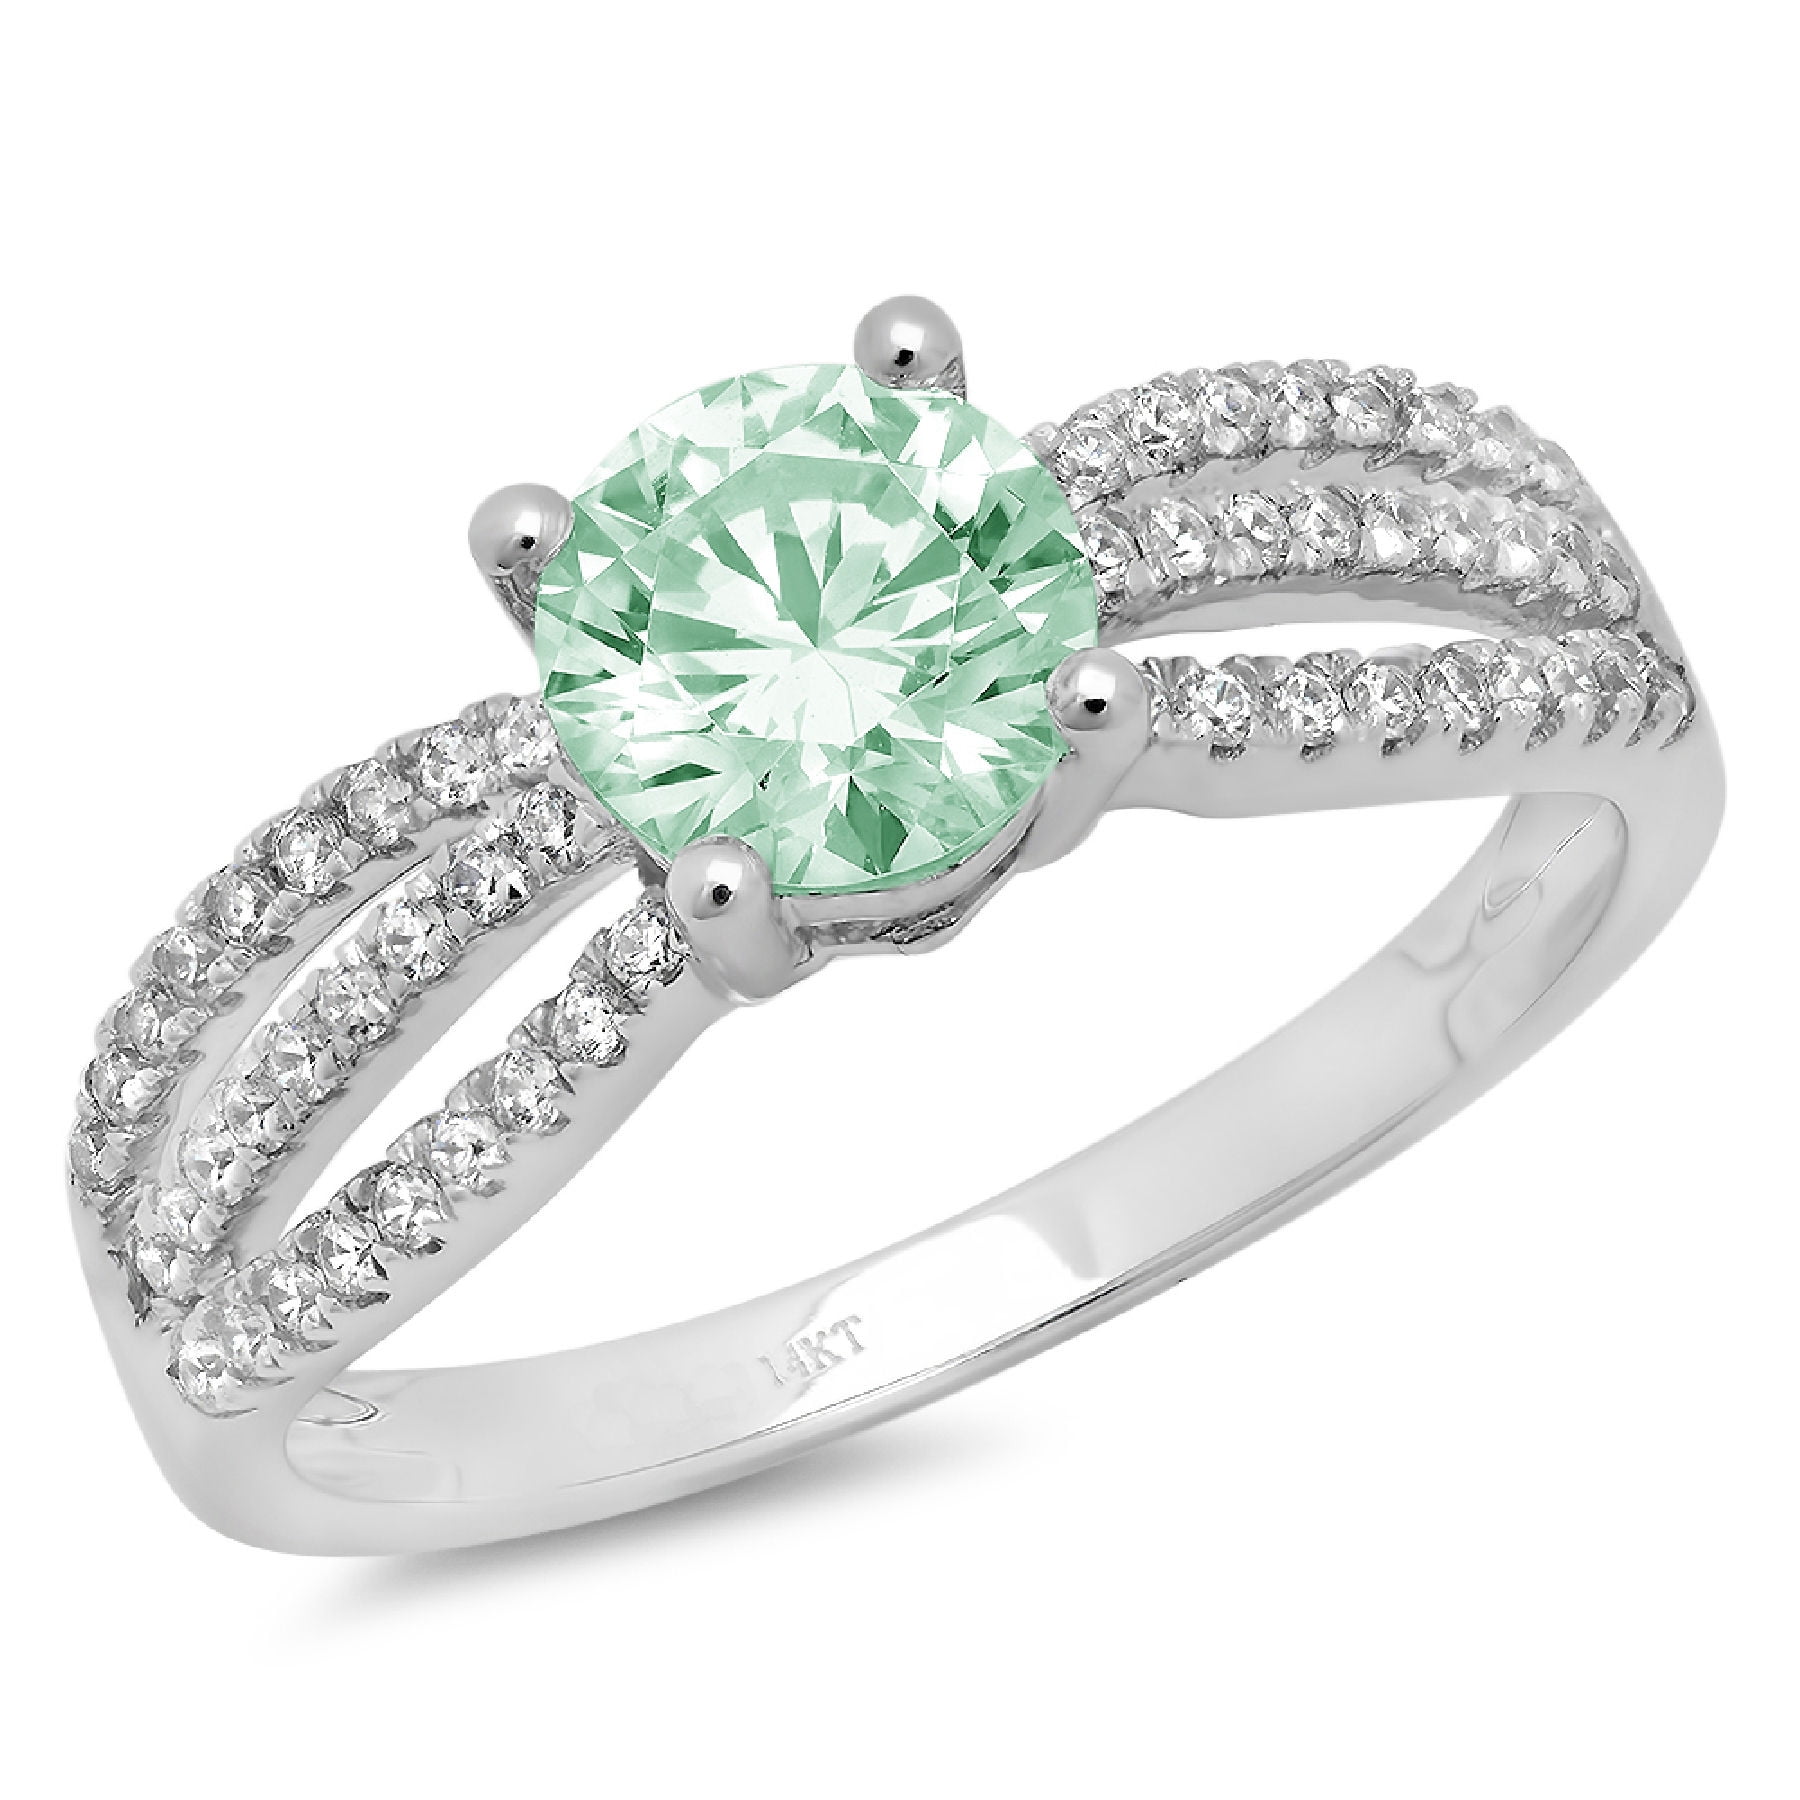 Engagement Cocktail Wedding Ring Art Deco May Birthstone Created Emerald Green Paraiba Tourmaline Ring White Gold Plated Silver Ring